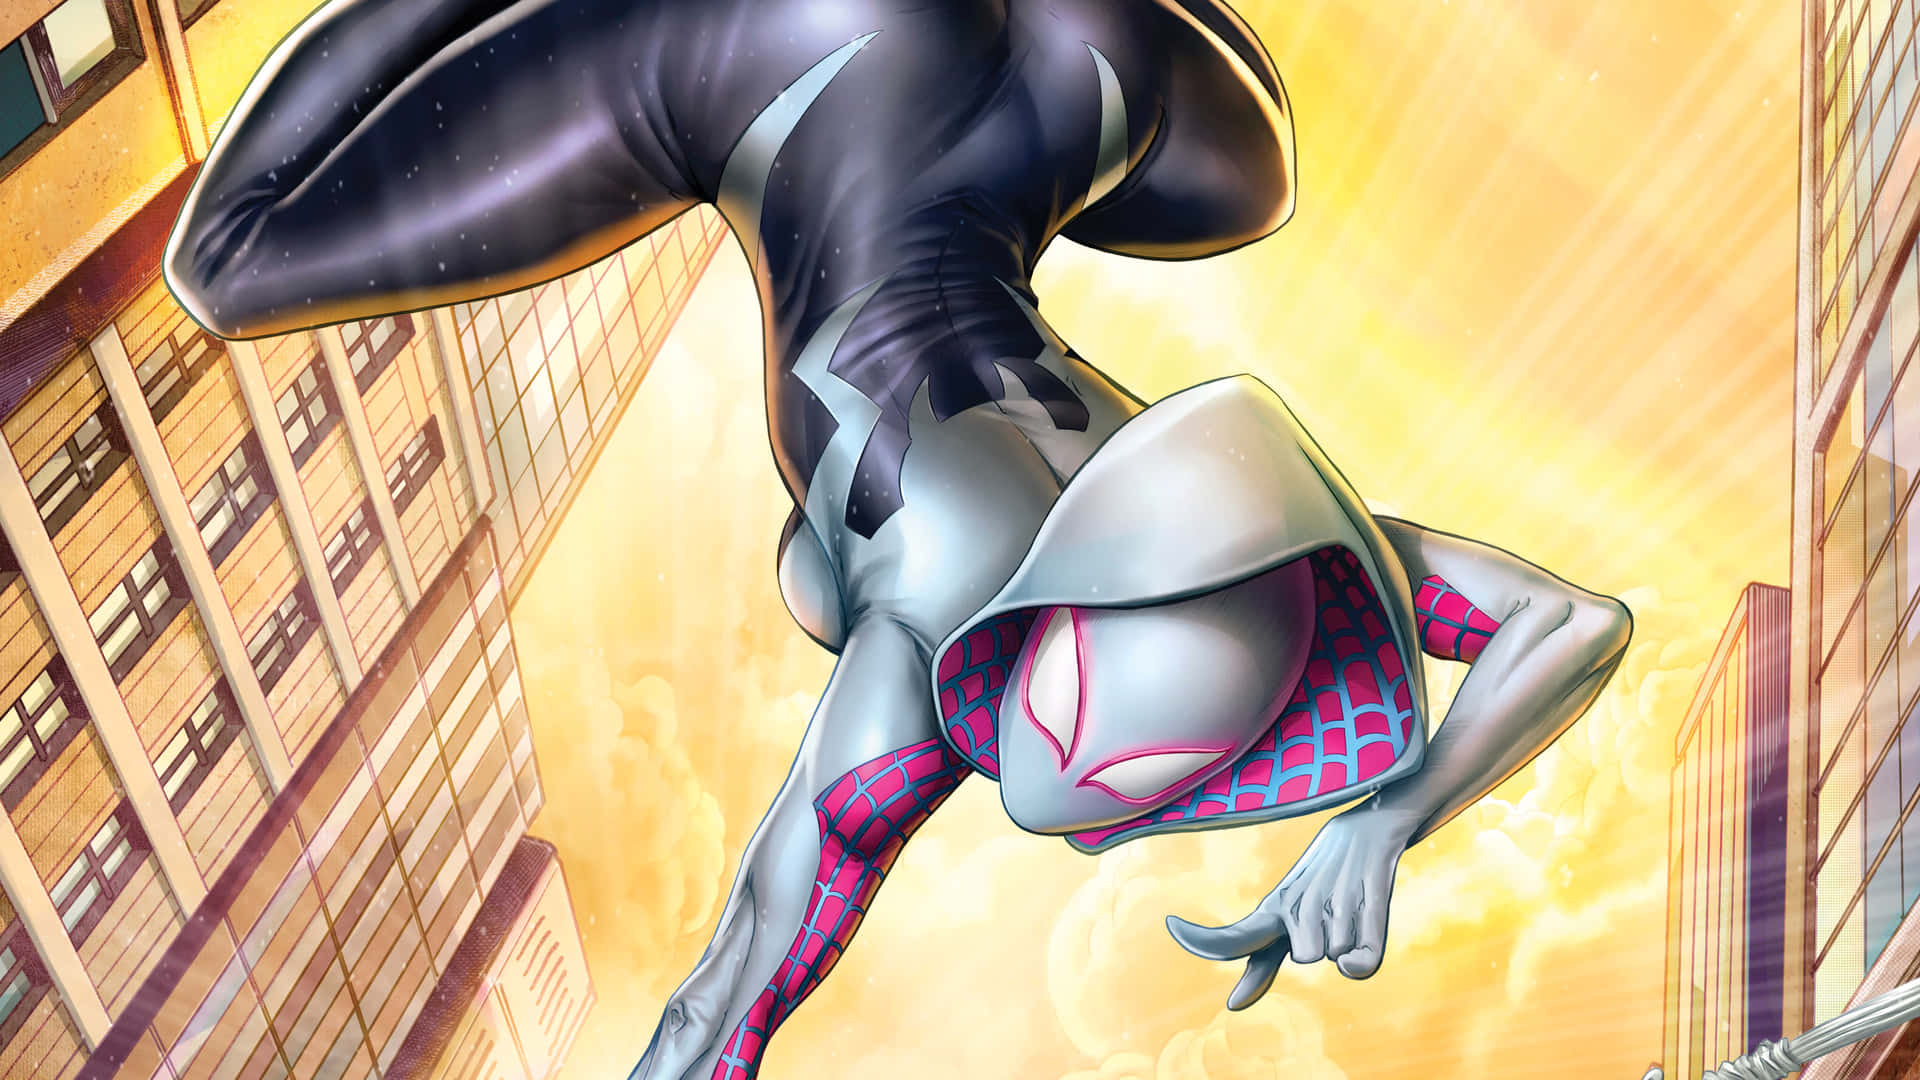 Make a statement with this powerful Spider Gwen background